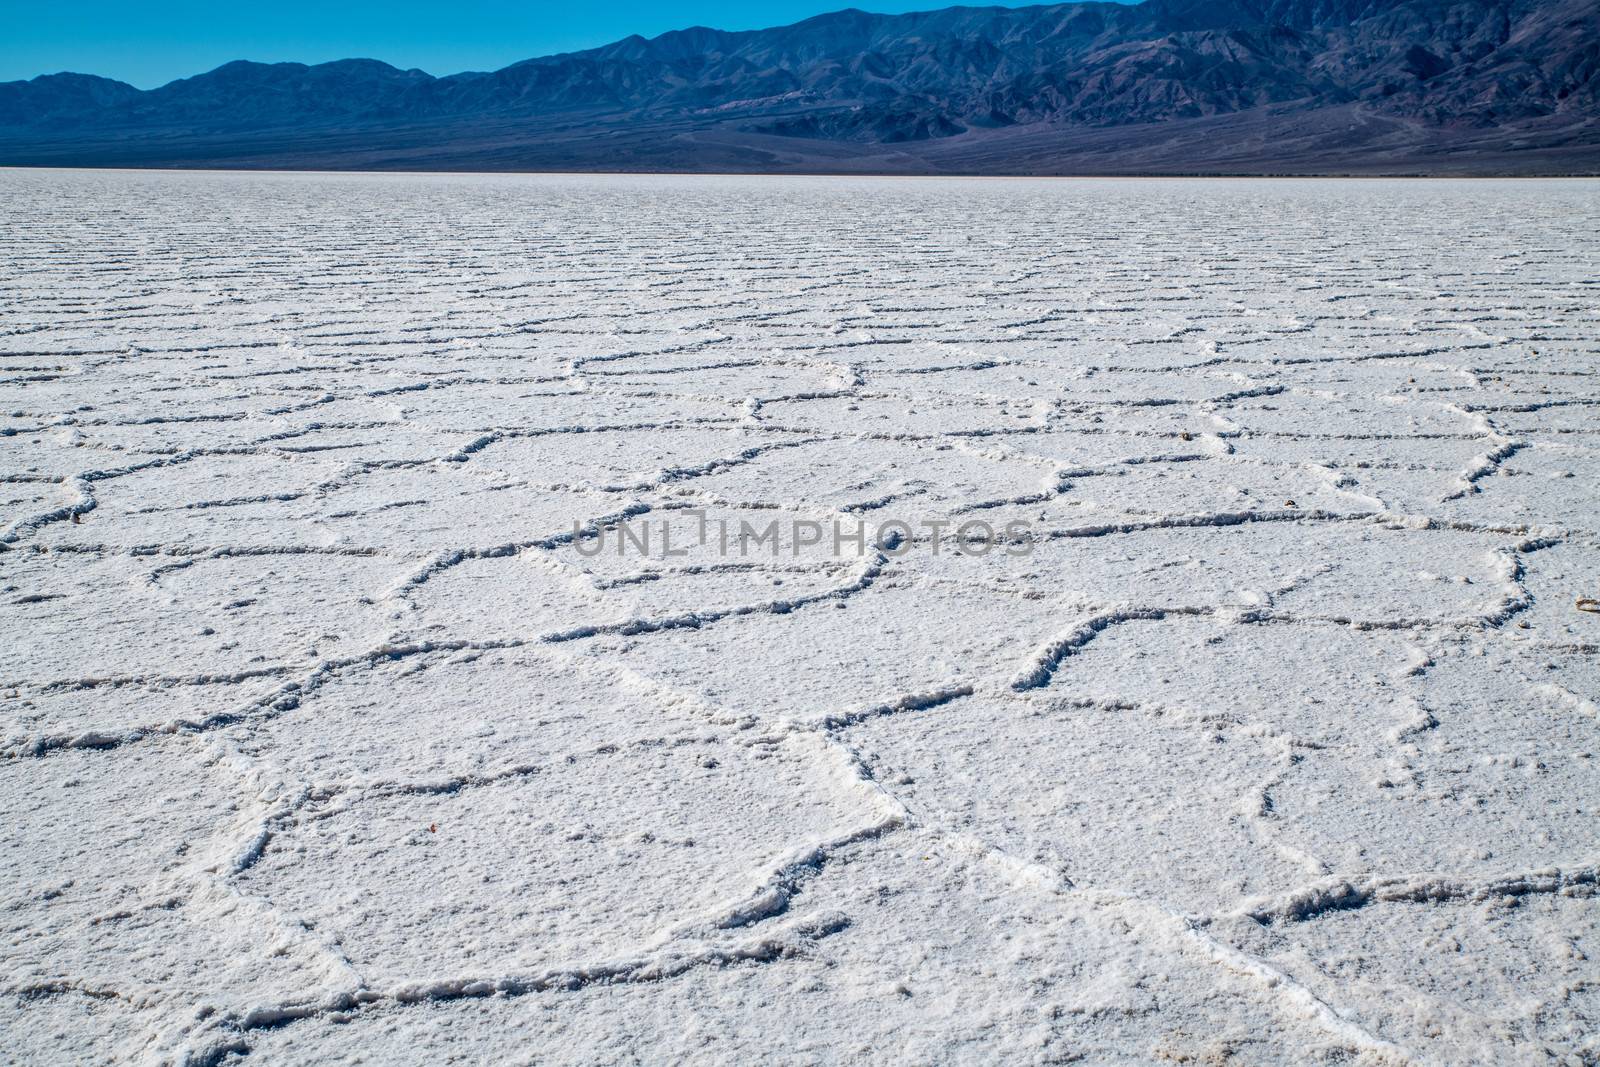 Bad Water in the Death Valley National Park, California, USA by Lordignolo